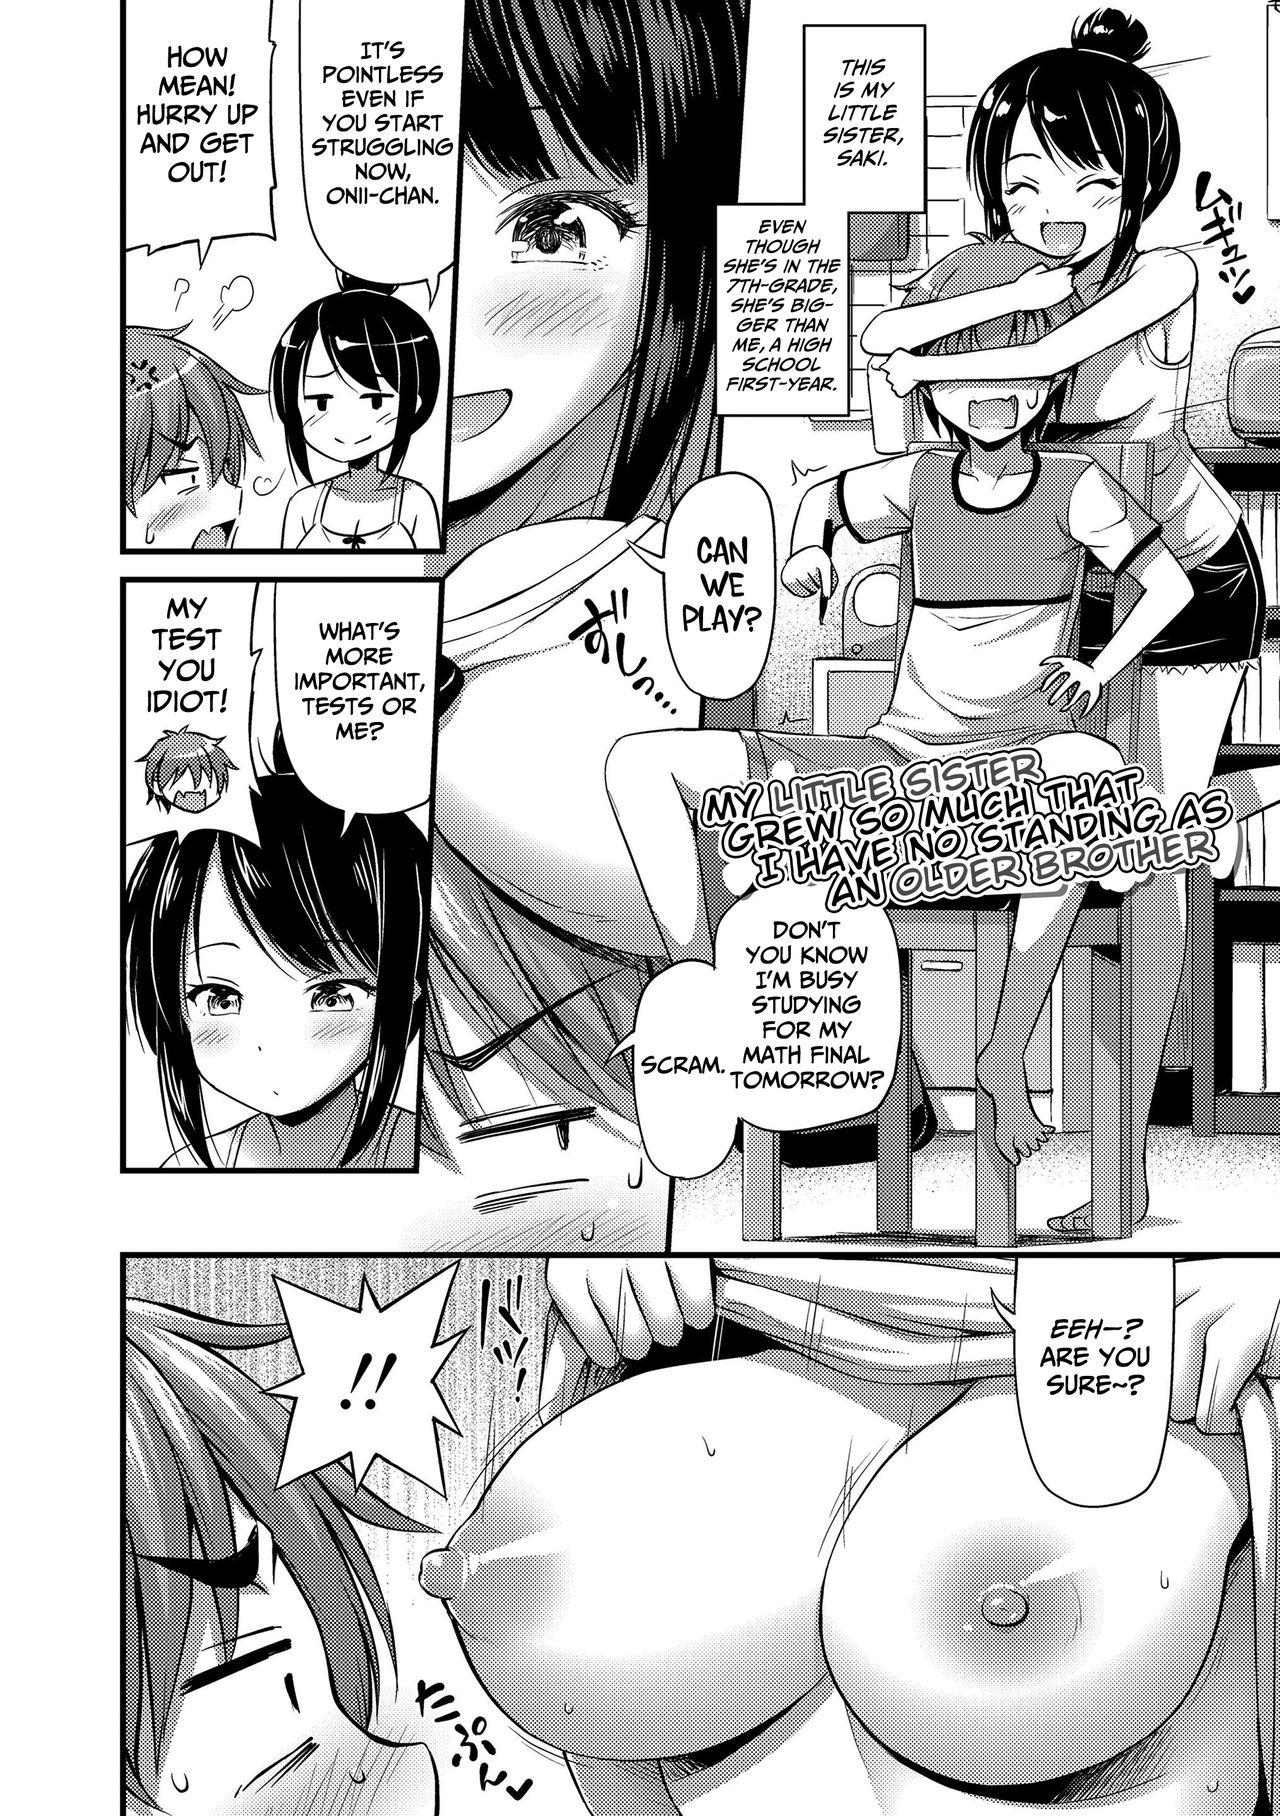 Dyke Imouto ga Sodachi Sugite Ani no Tachiba ga Nai | My Little Sister Grew So Much That I Have No Standing as an Older Brother Trimmed - Page 2